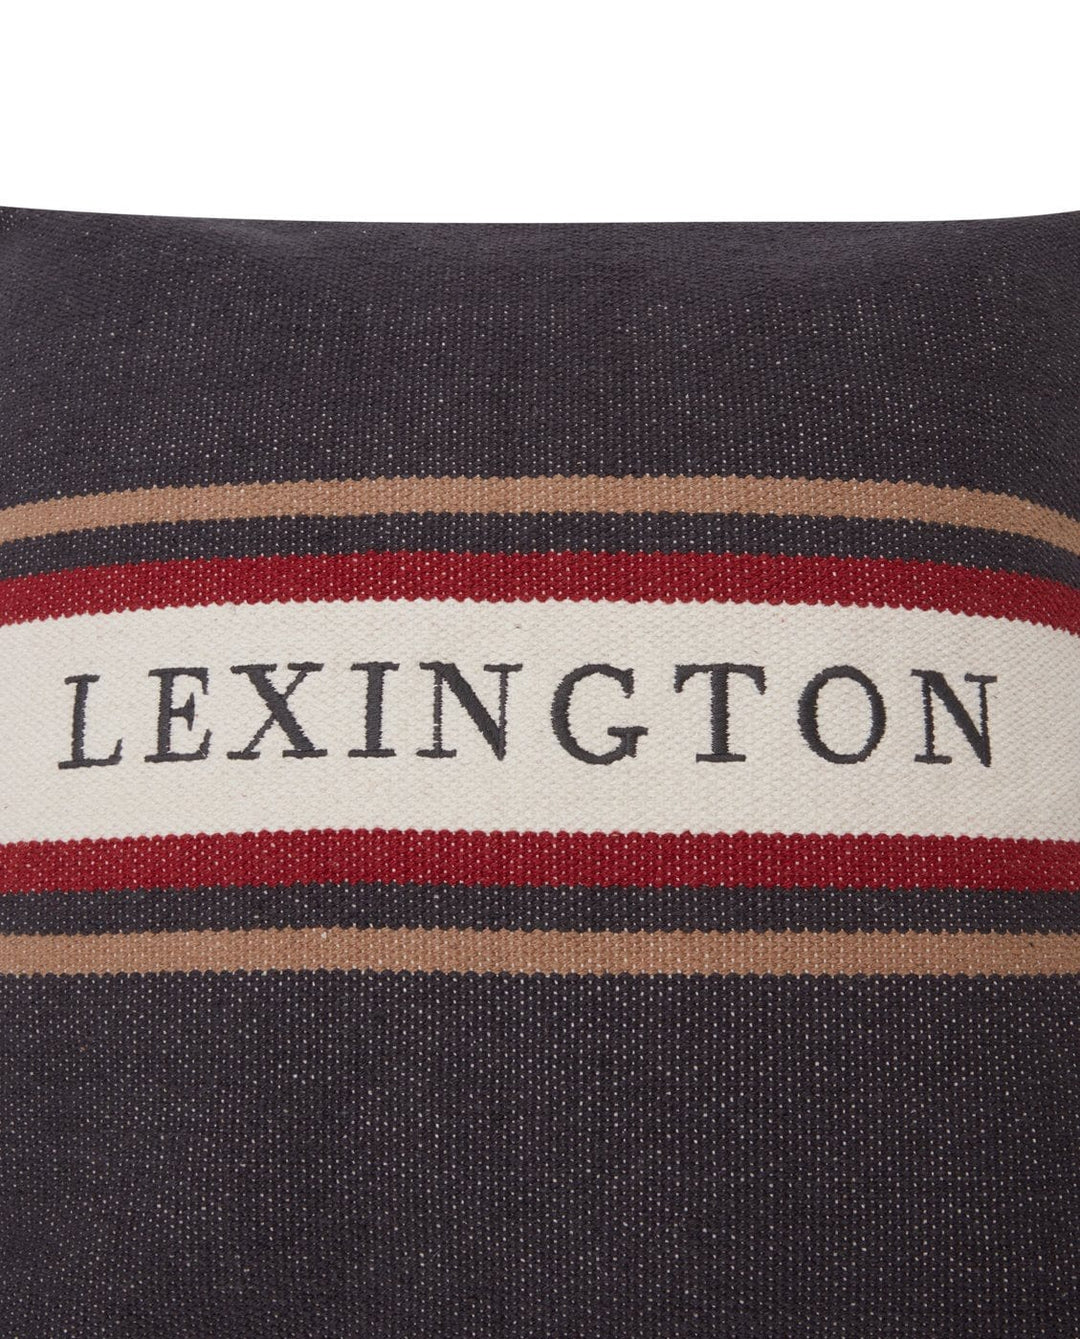 Lexington Striped Logo Recycled Cotton Kuddfodral